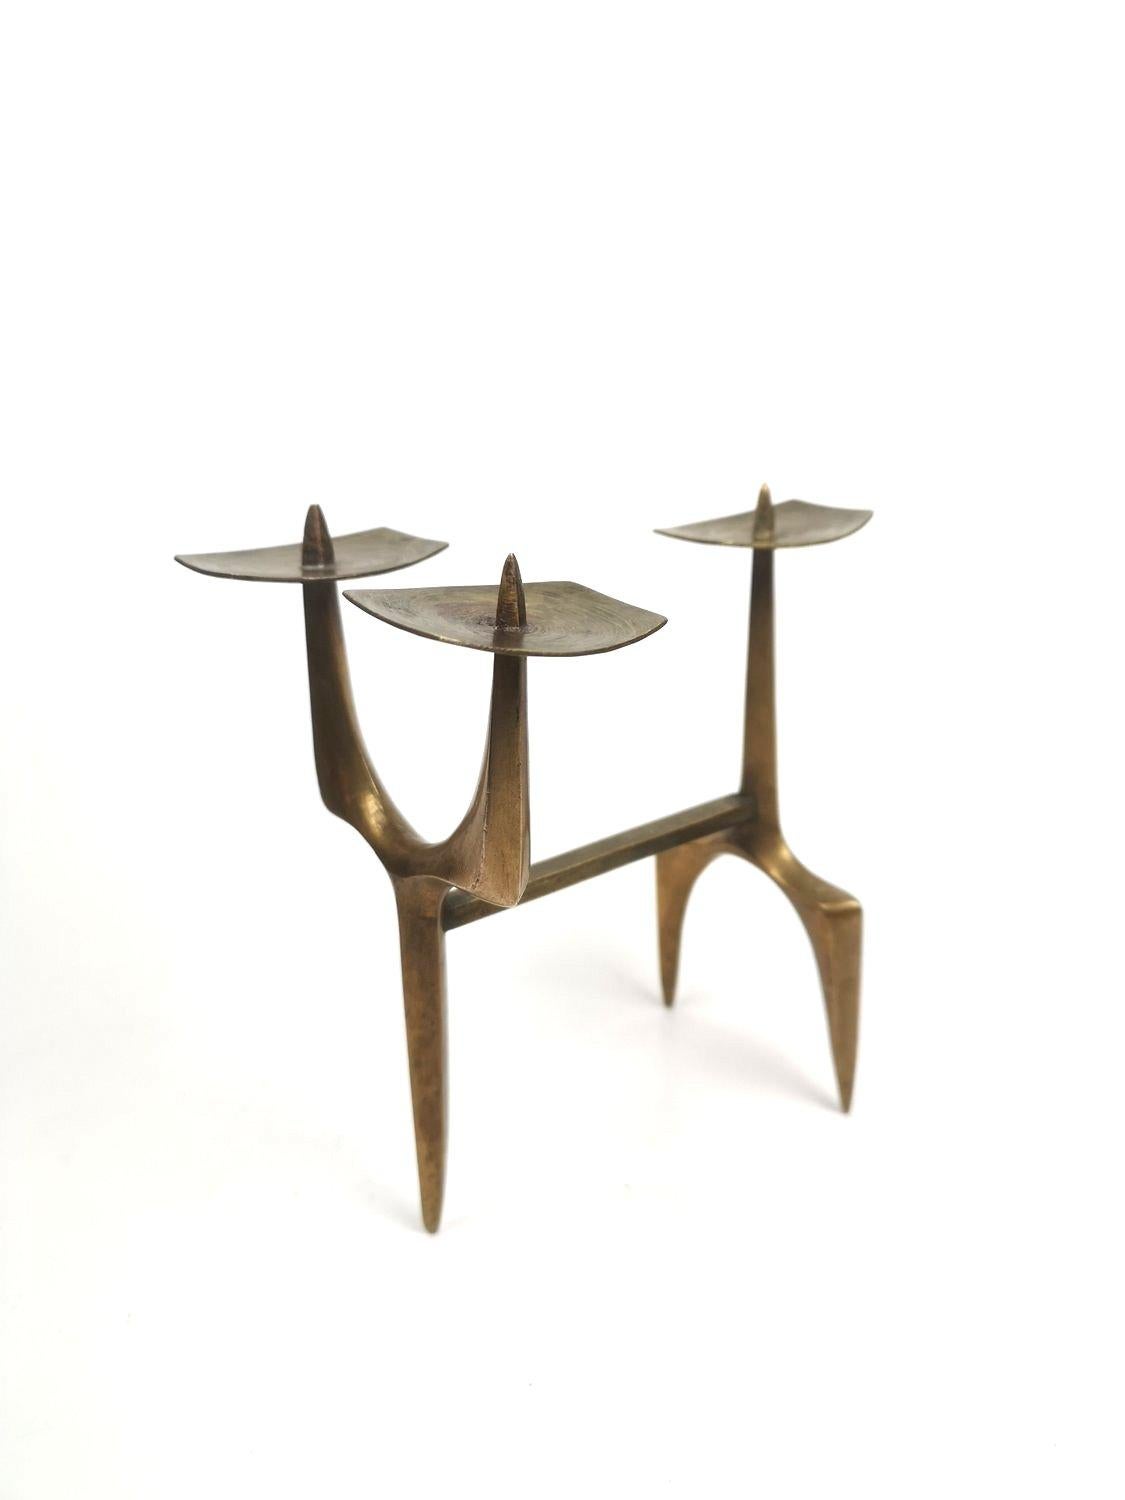 Three arm bronze candelabra, designed and hand crafted in the 1960's by Hungarian metal artist Janos Mate. Artistically a perfect representation of its period.